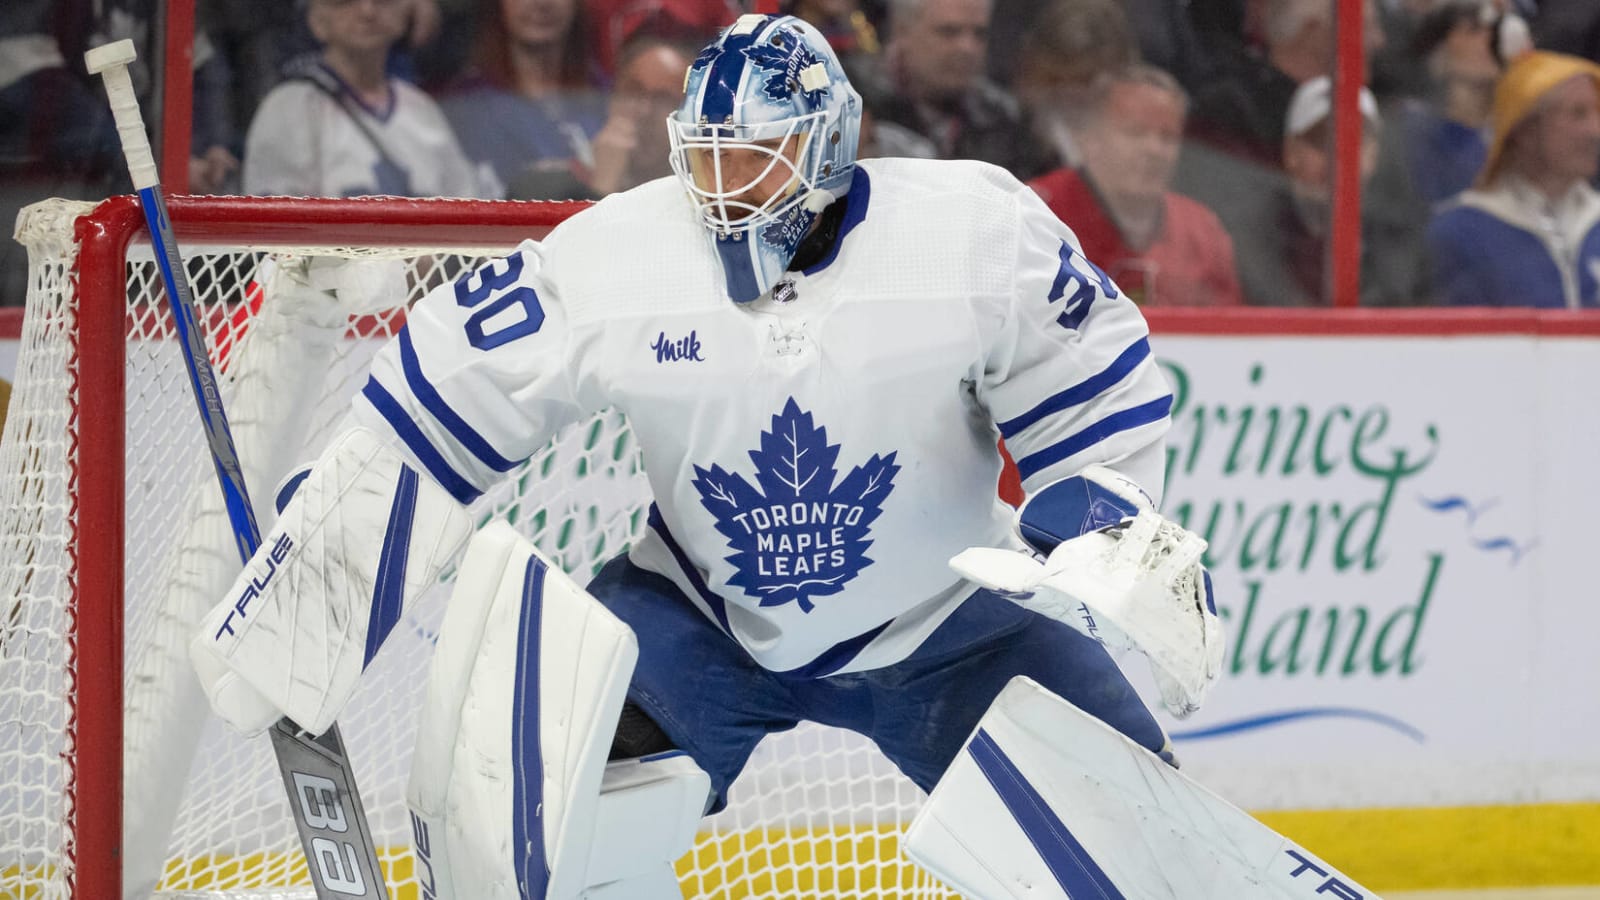 Maple Leafs goalie expected to miss all of 2023-24 after hip surgery